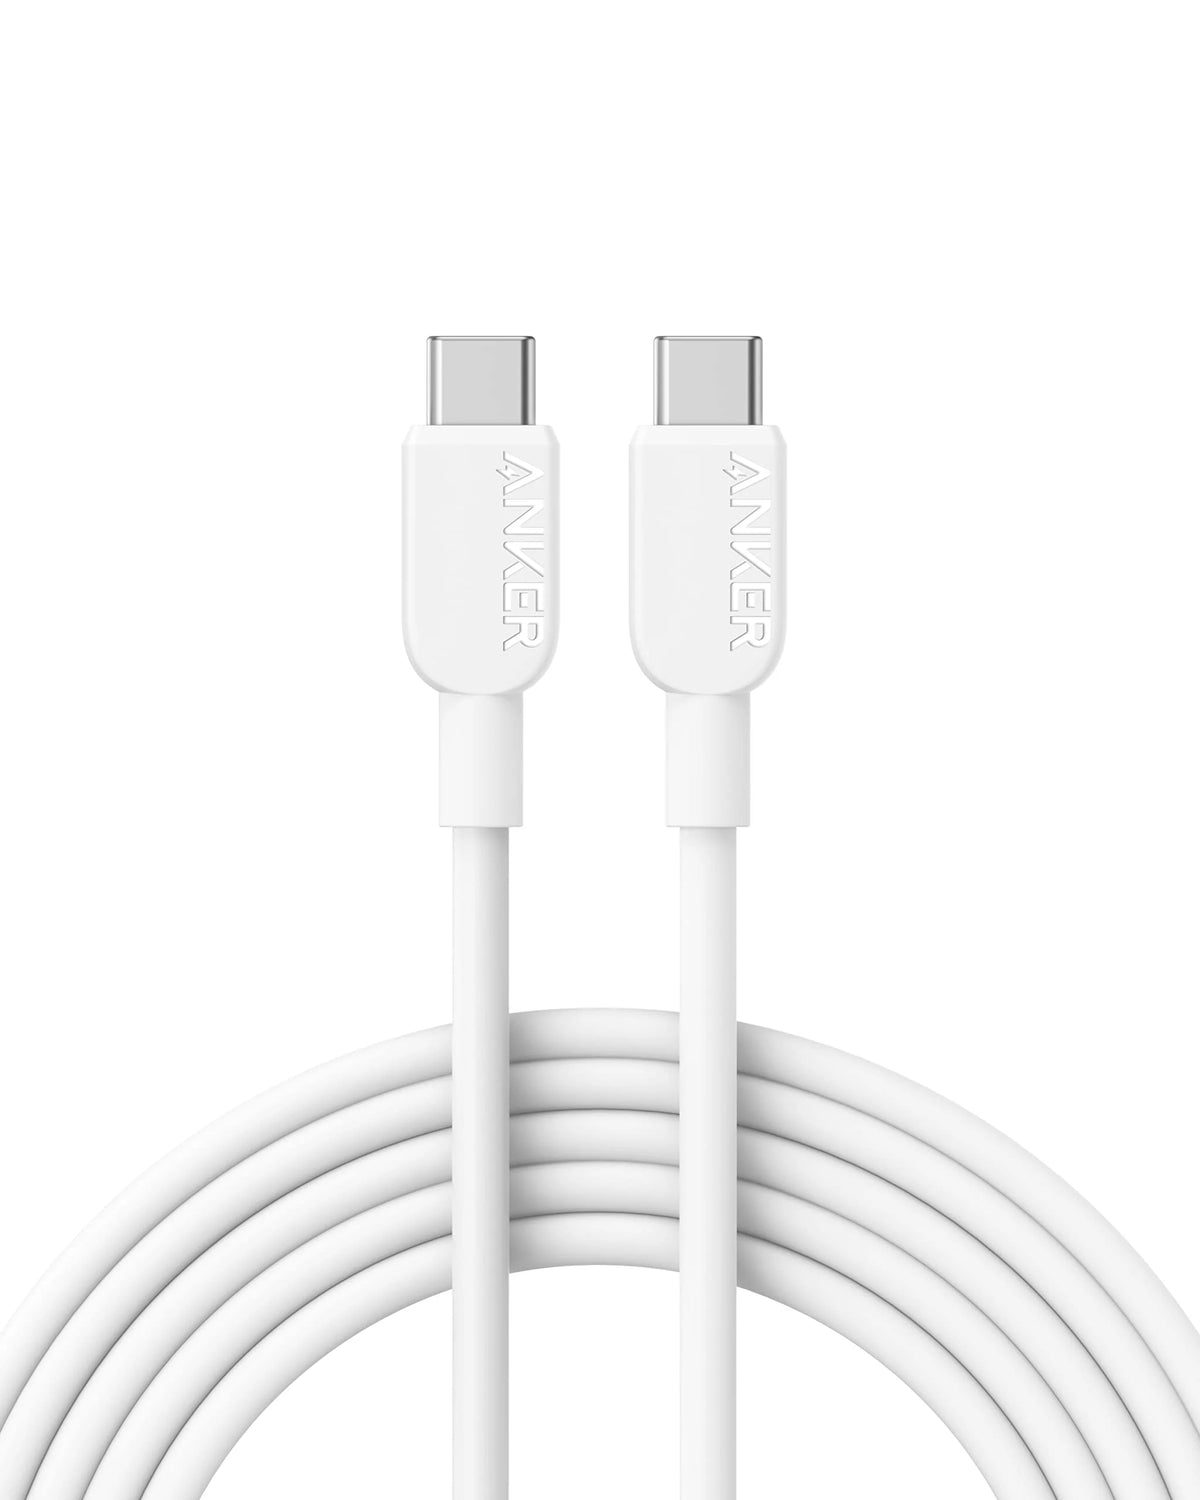 ANKER A81E2 - 310 USB-C to USB-C Cable - 6ft (1.8M)